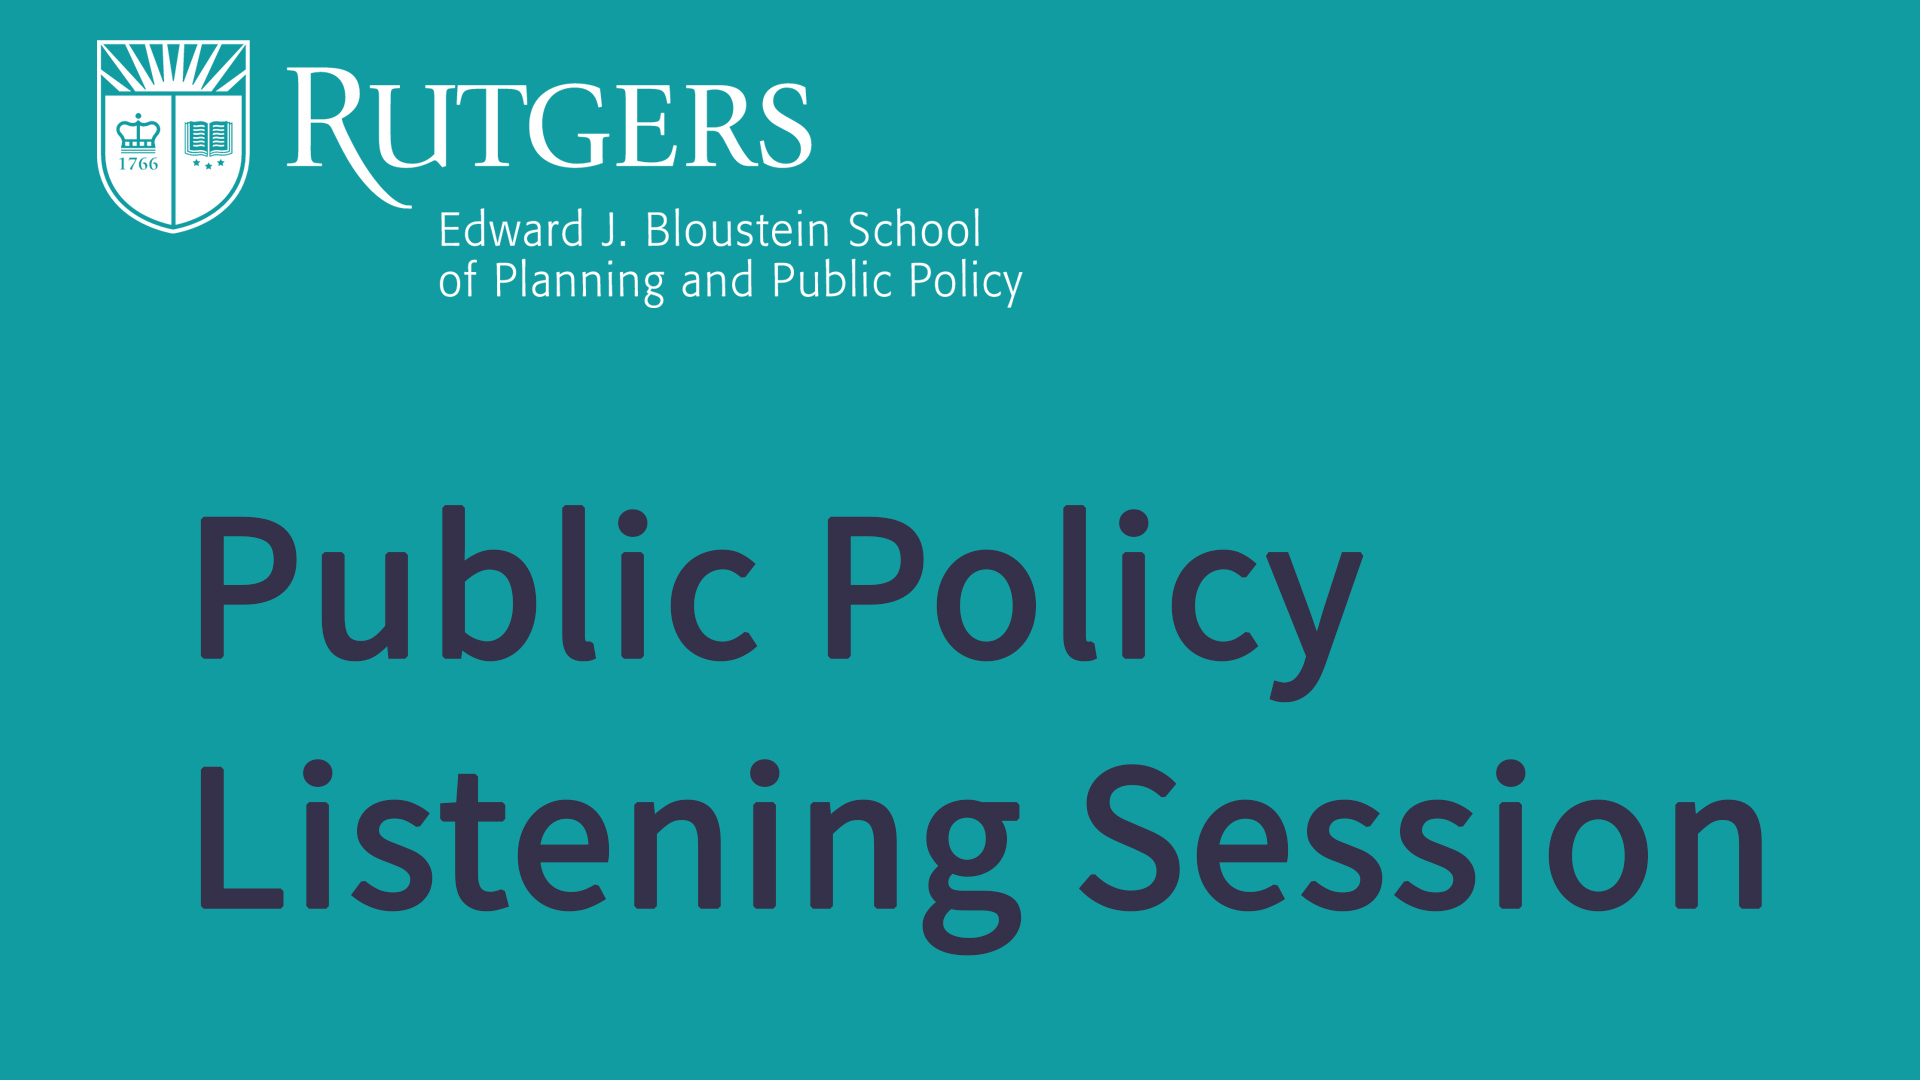 Public policy listening session in teal